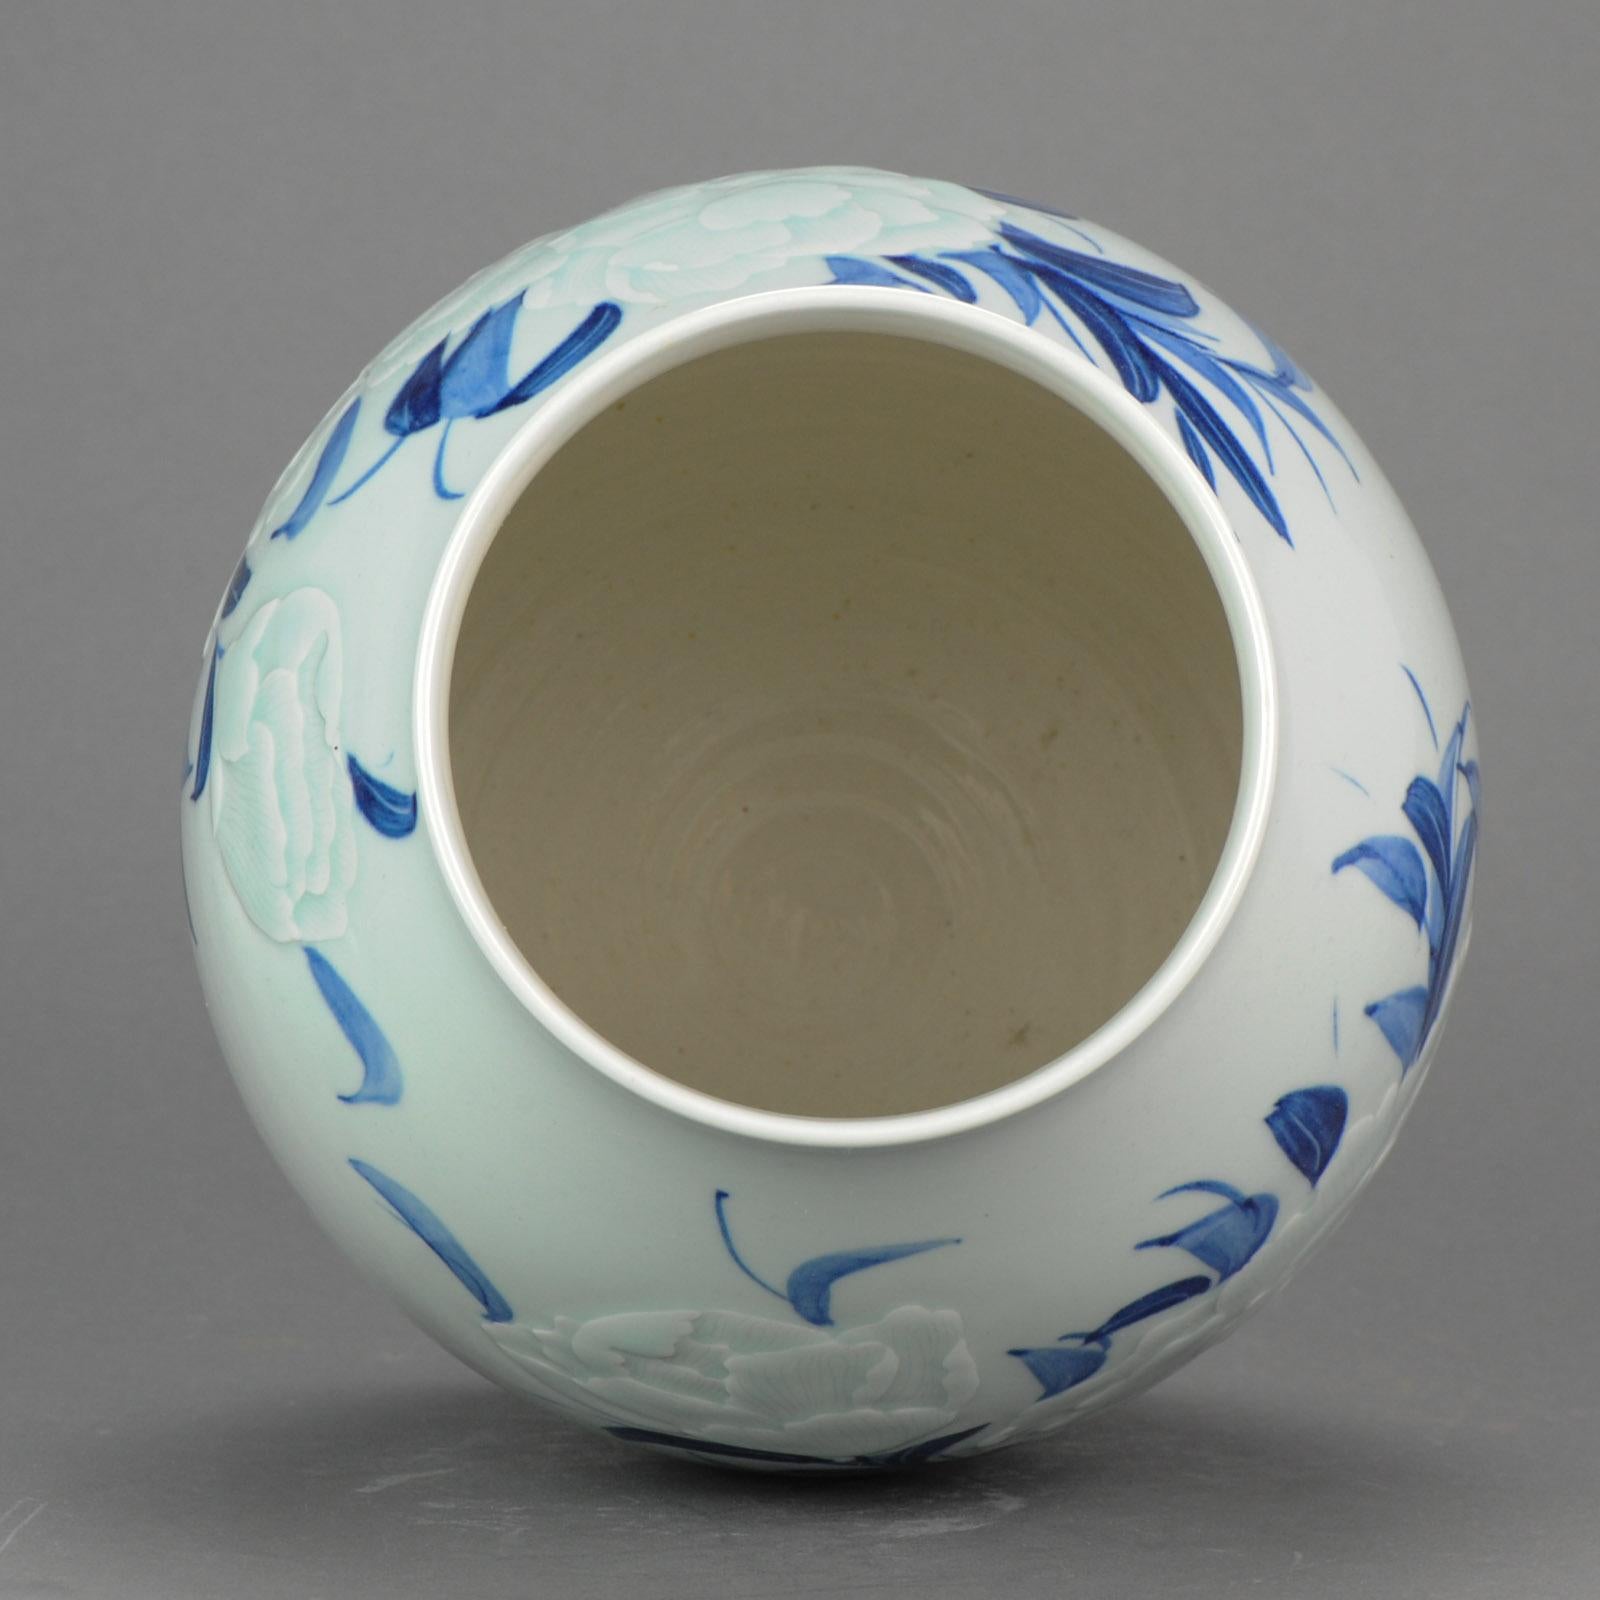 Wanglin '1972' Artist Mark Celadon Anhua Vase Dated 2001 Chinese Porcelain Vase For Sale 4